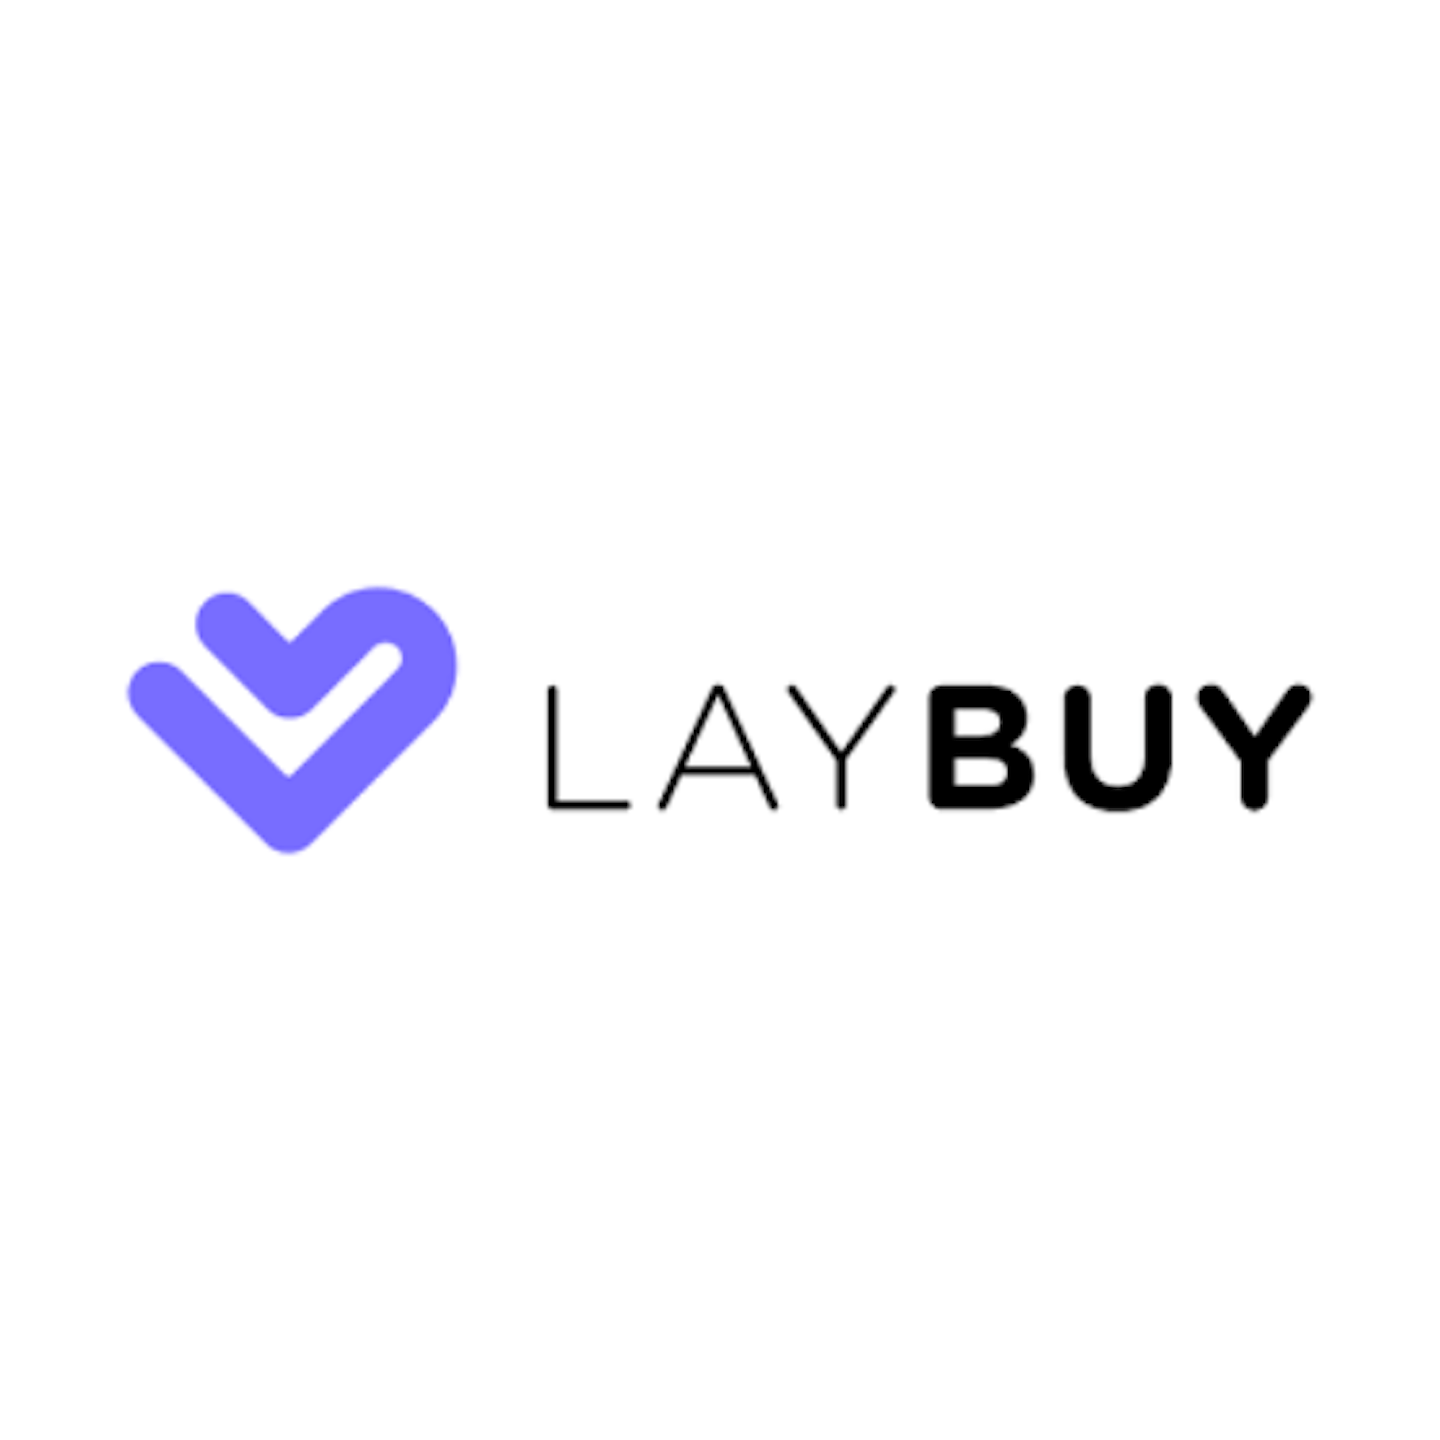 buy now pay later apps Laybuy